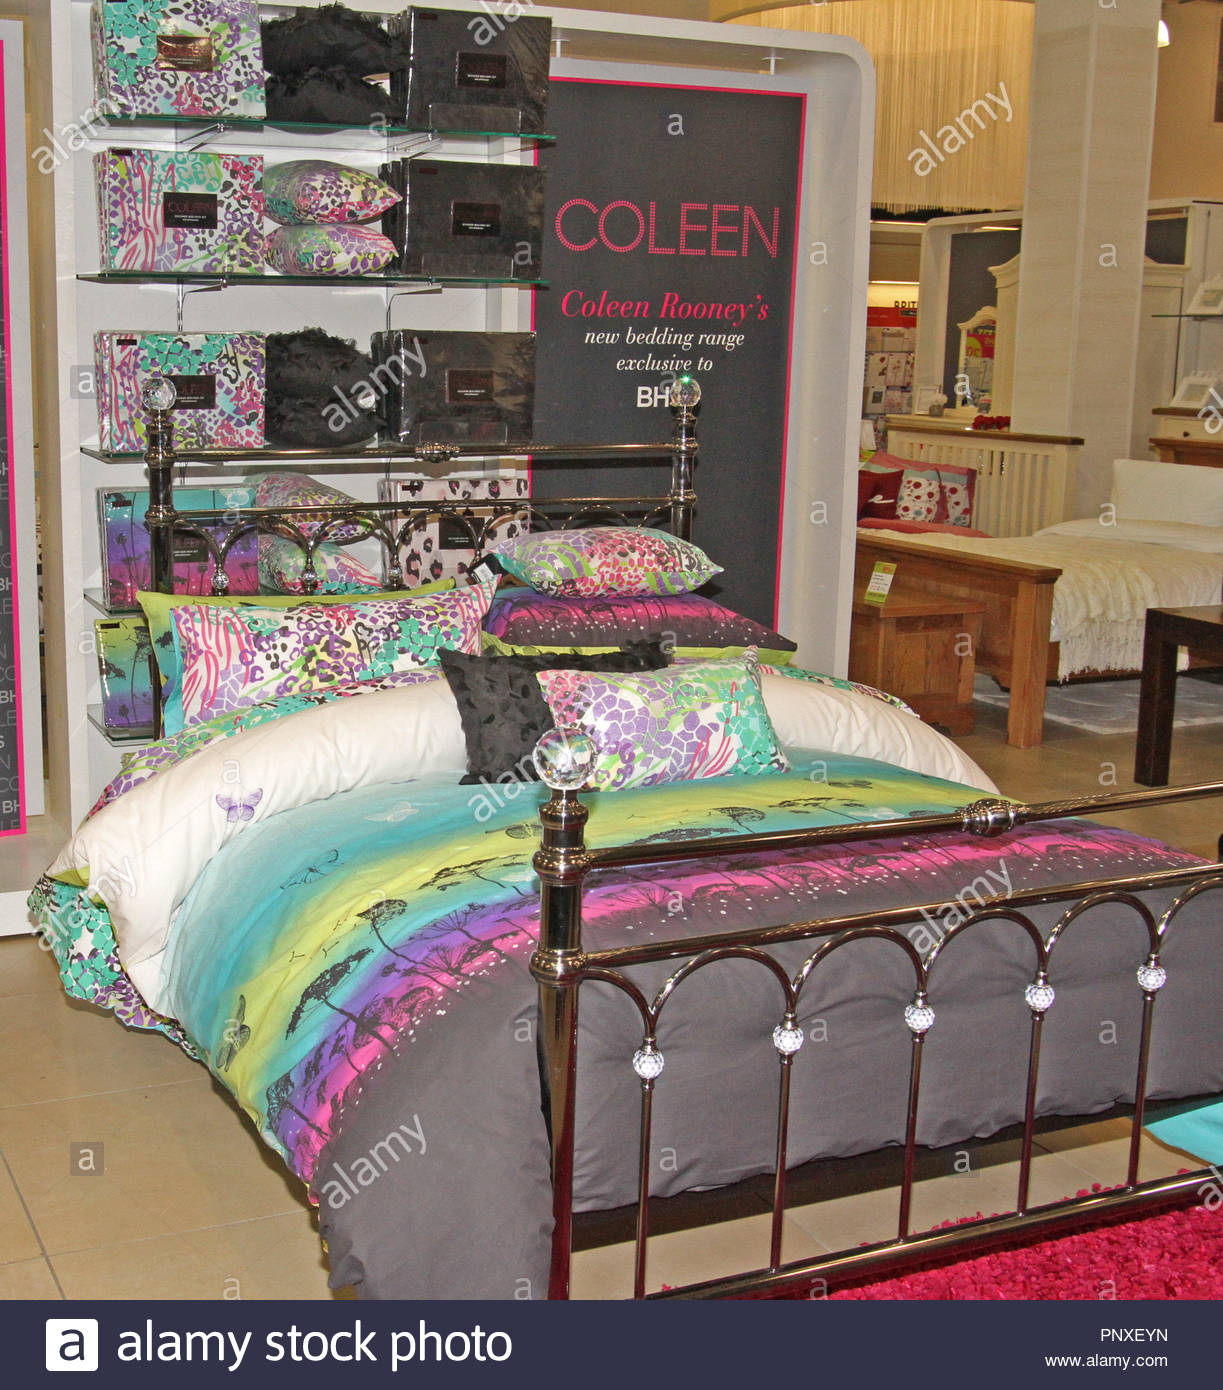 Coleen Rooney Launches Her New Bedding Range Exclusive To Bhs At